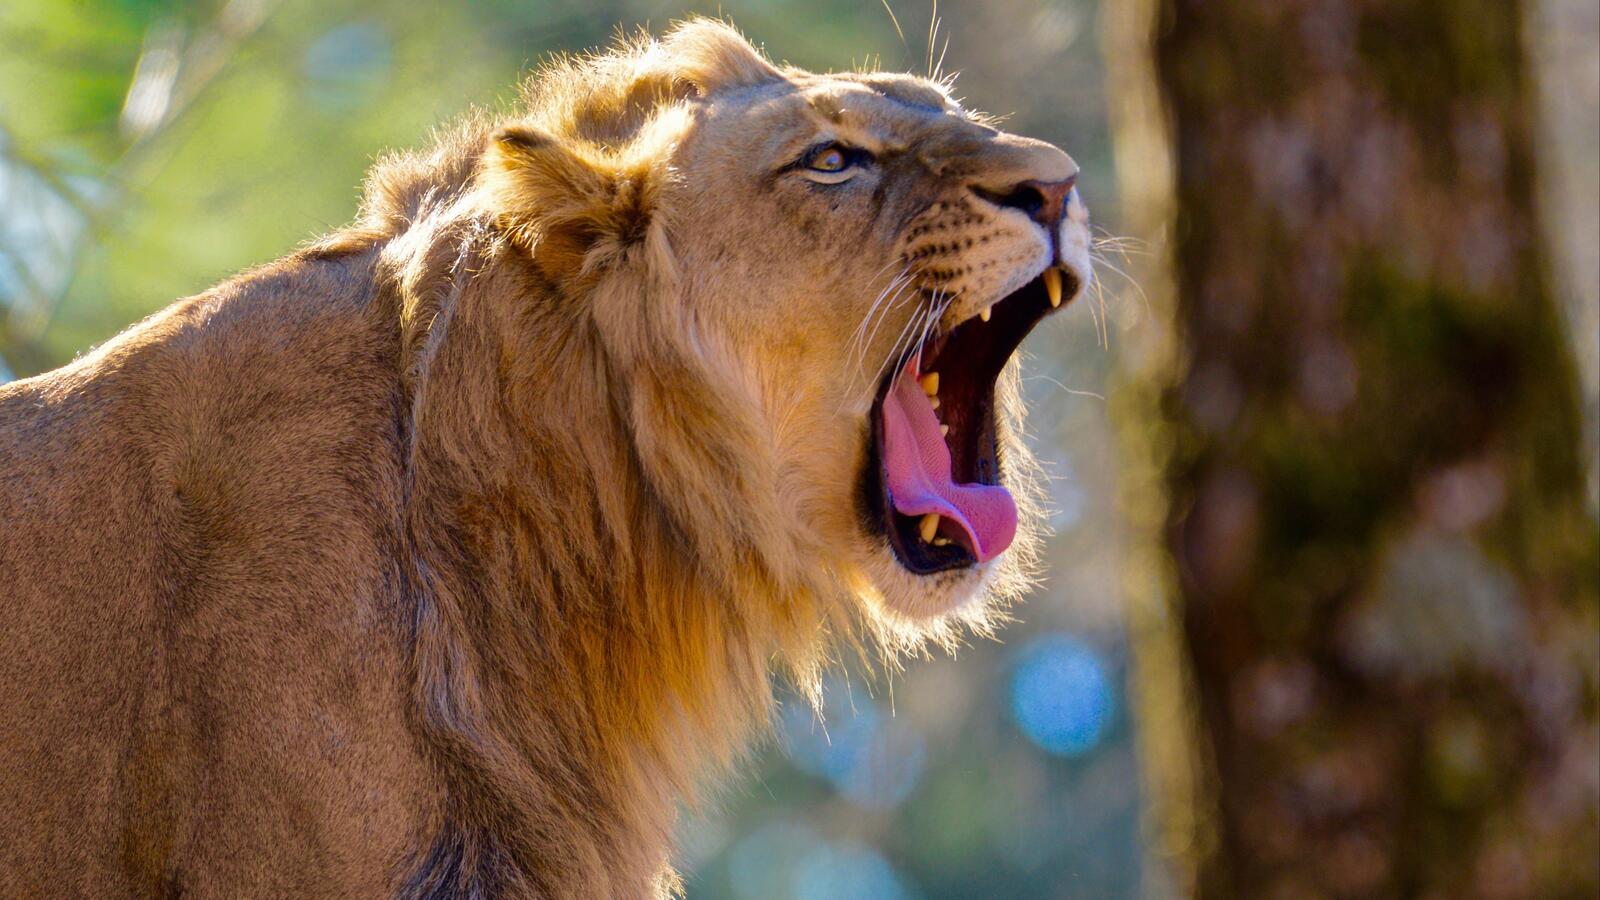 Wallpapers lion majestic yawn on the desktop